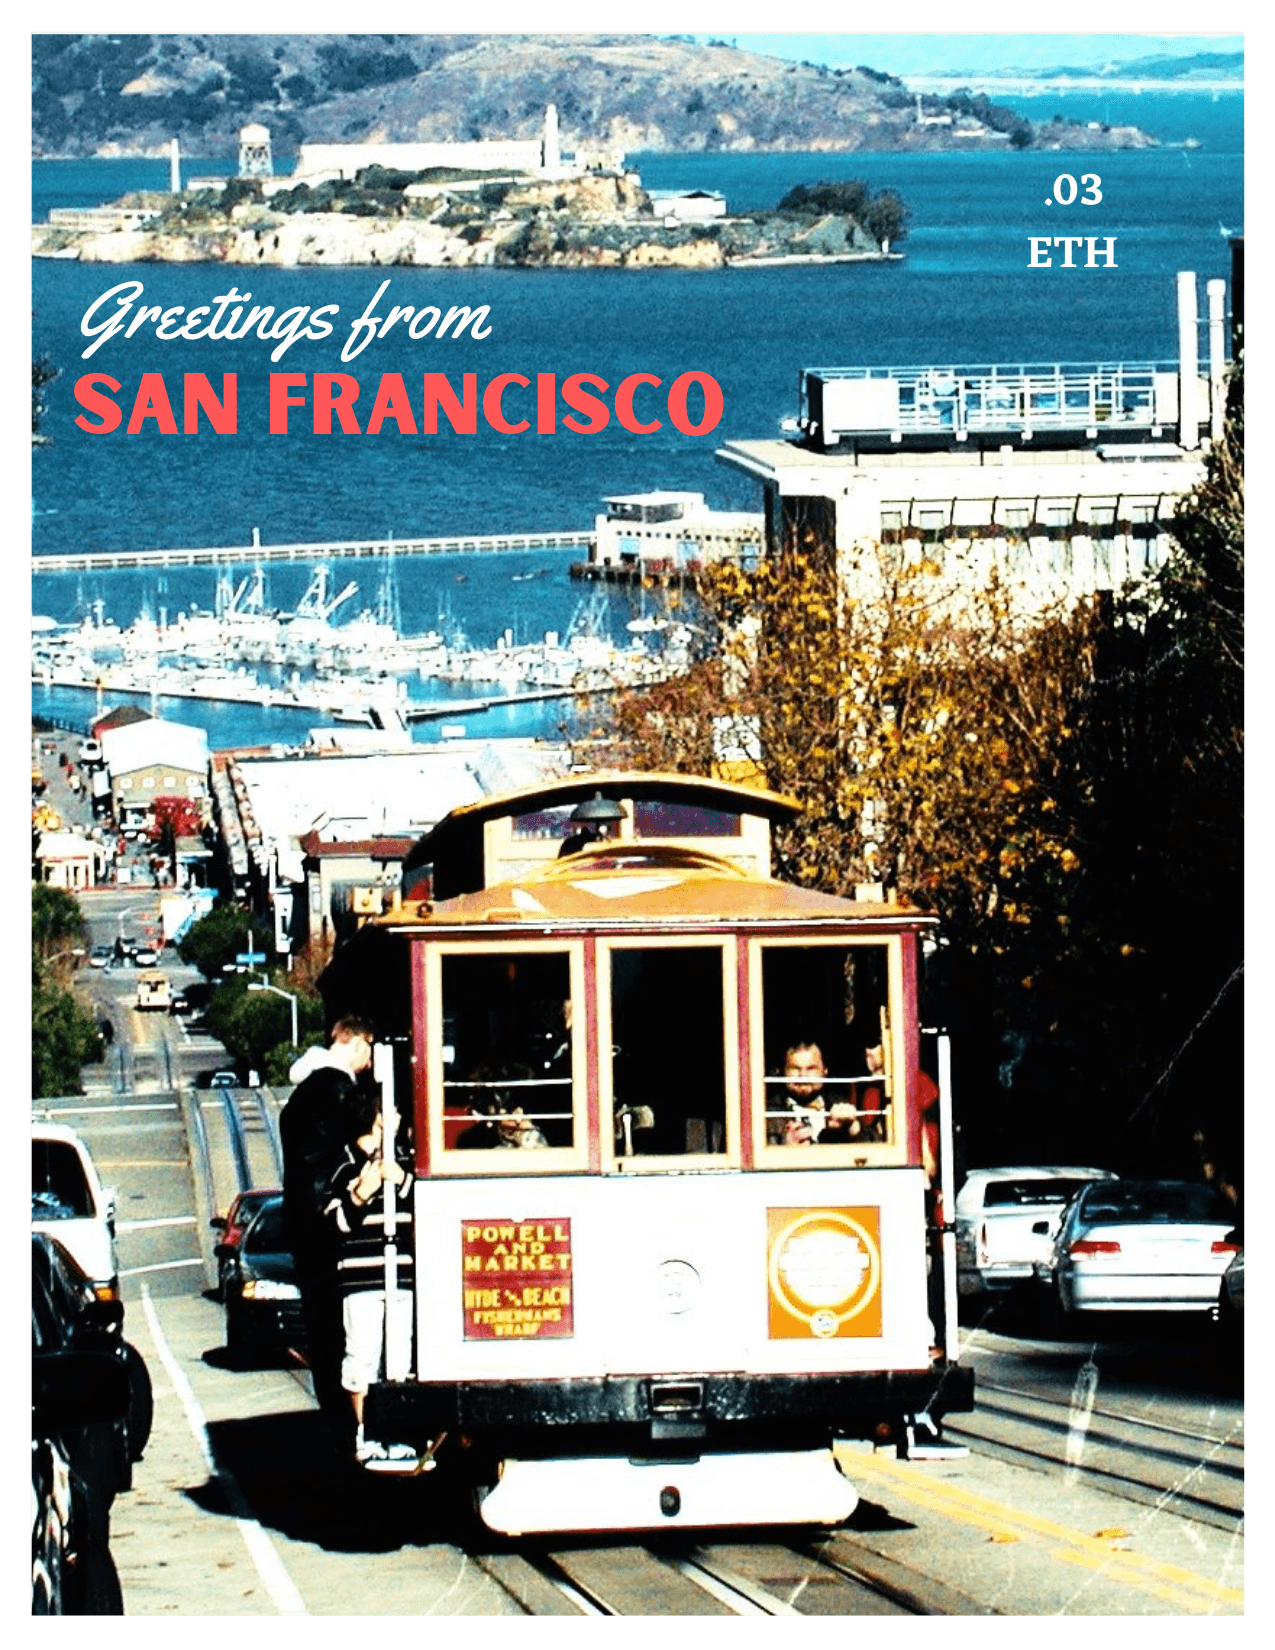 Greetings from San Francisco 002 - Hyde St. Cable Car